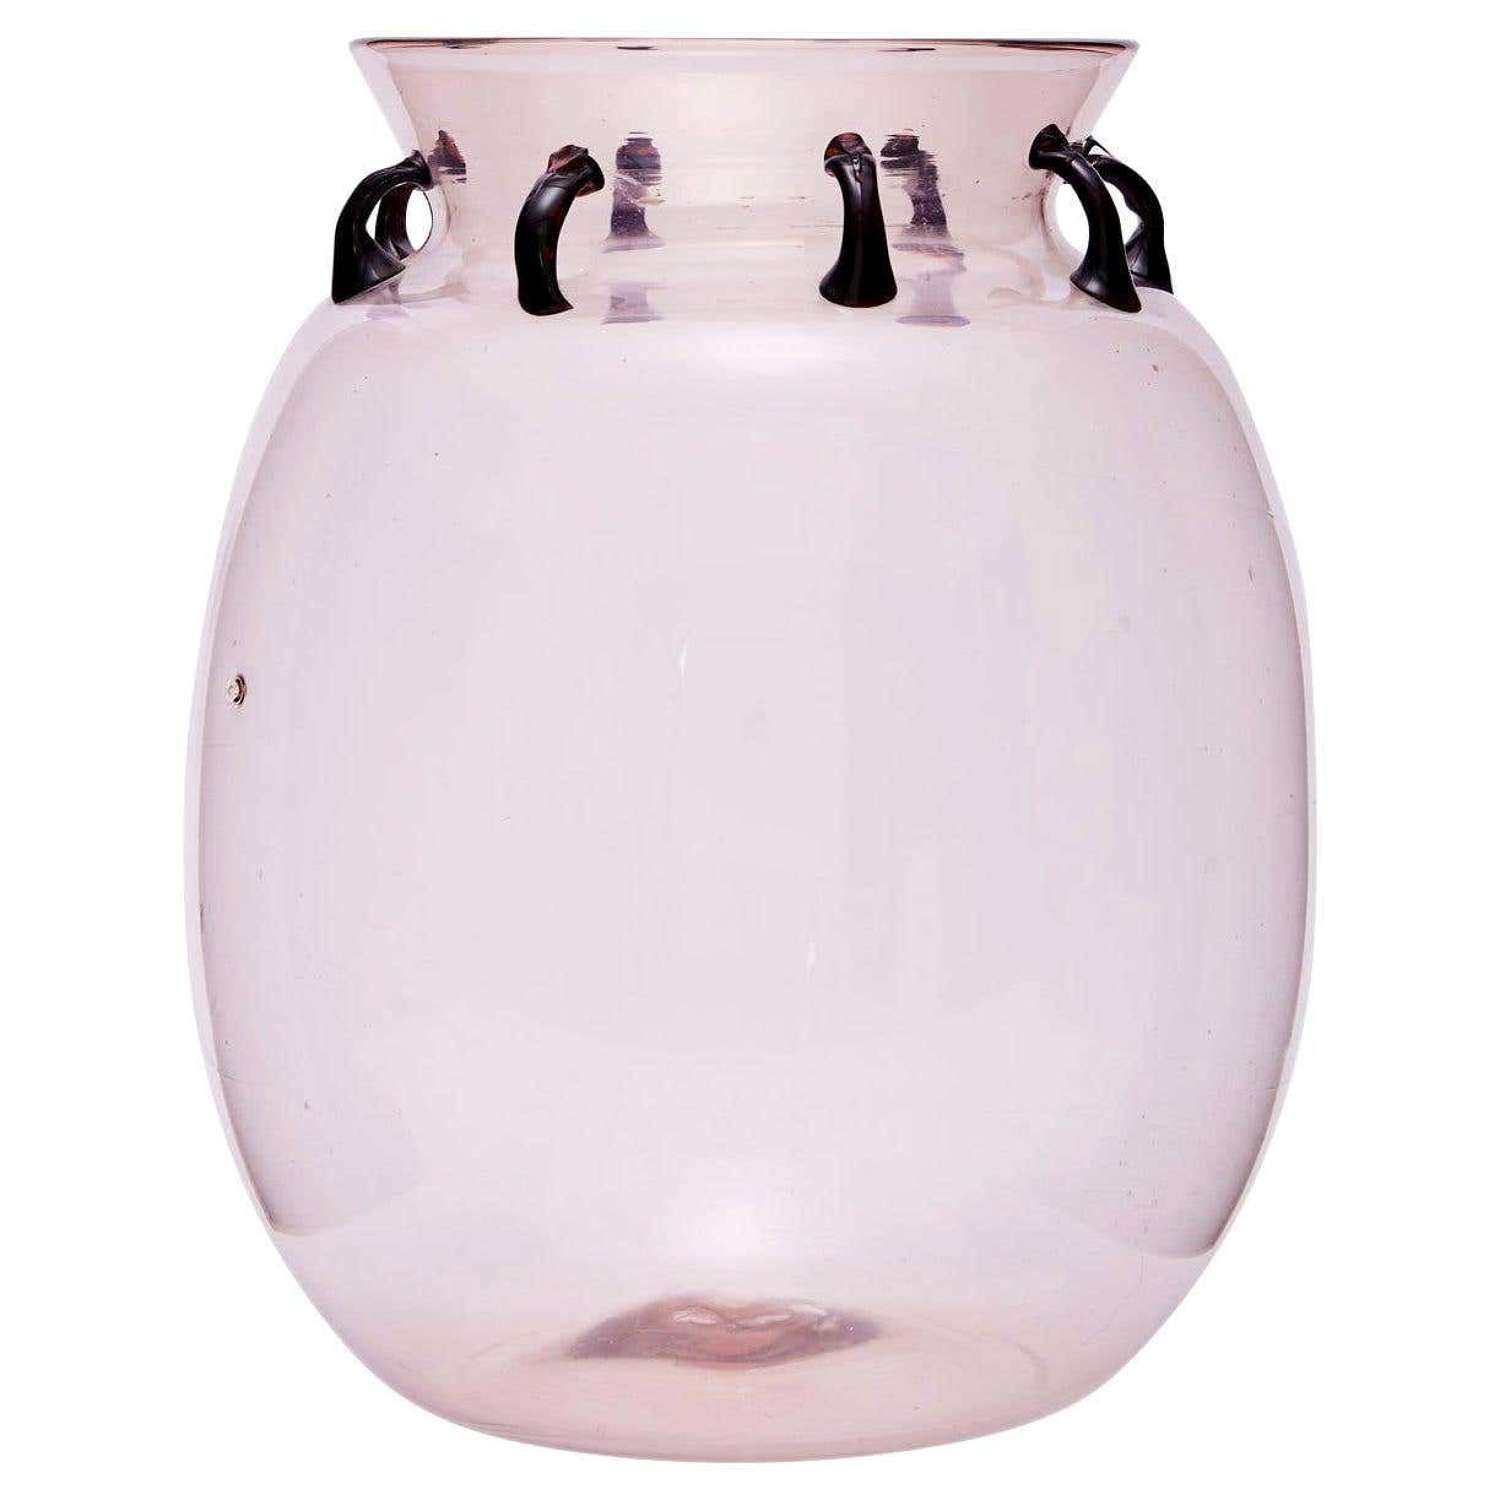 Soffiato Vase by Mvm Cappellin, for Pauly & Co, circa 1921